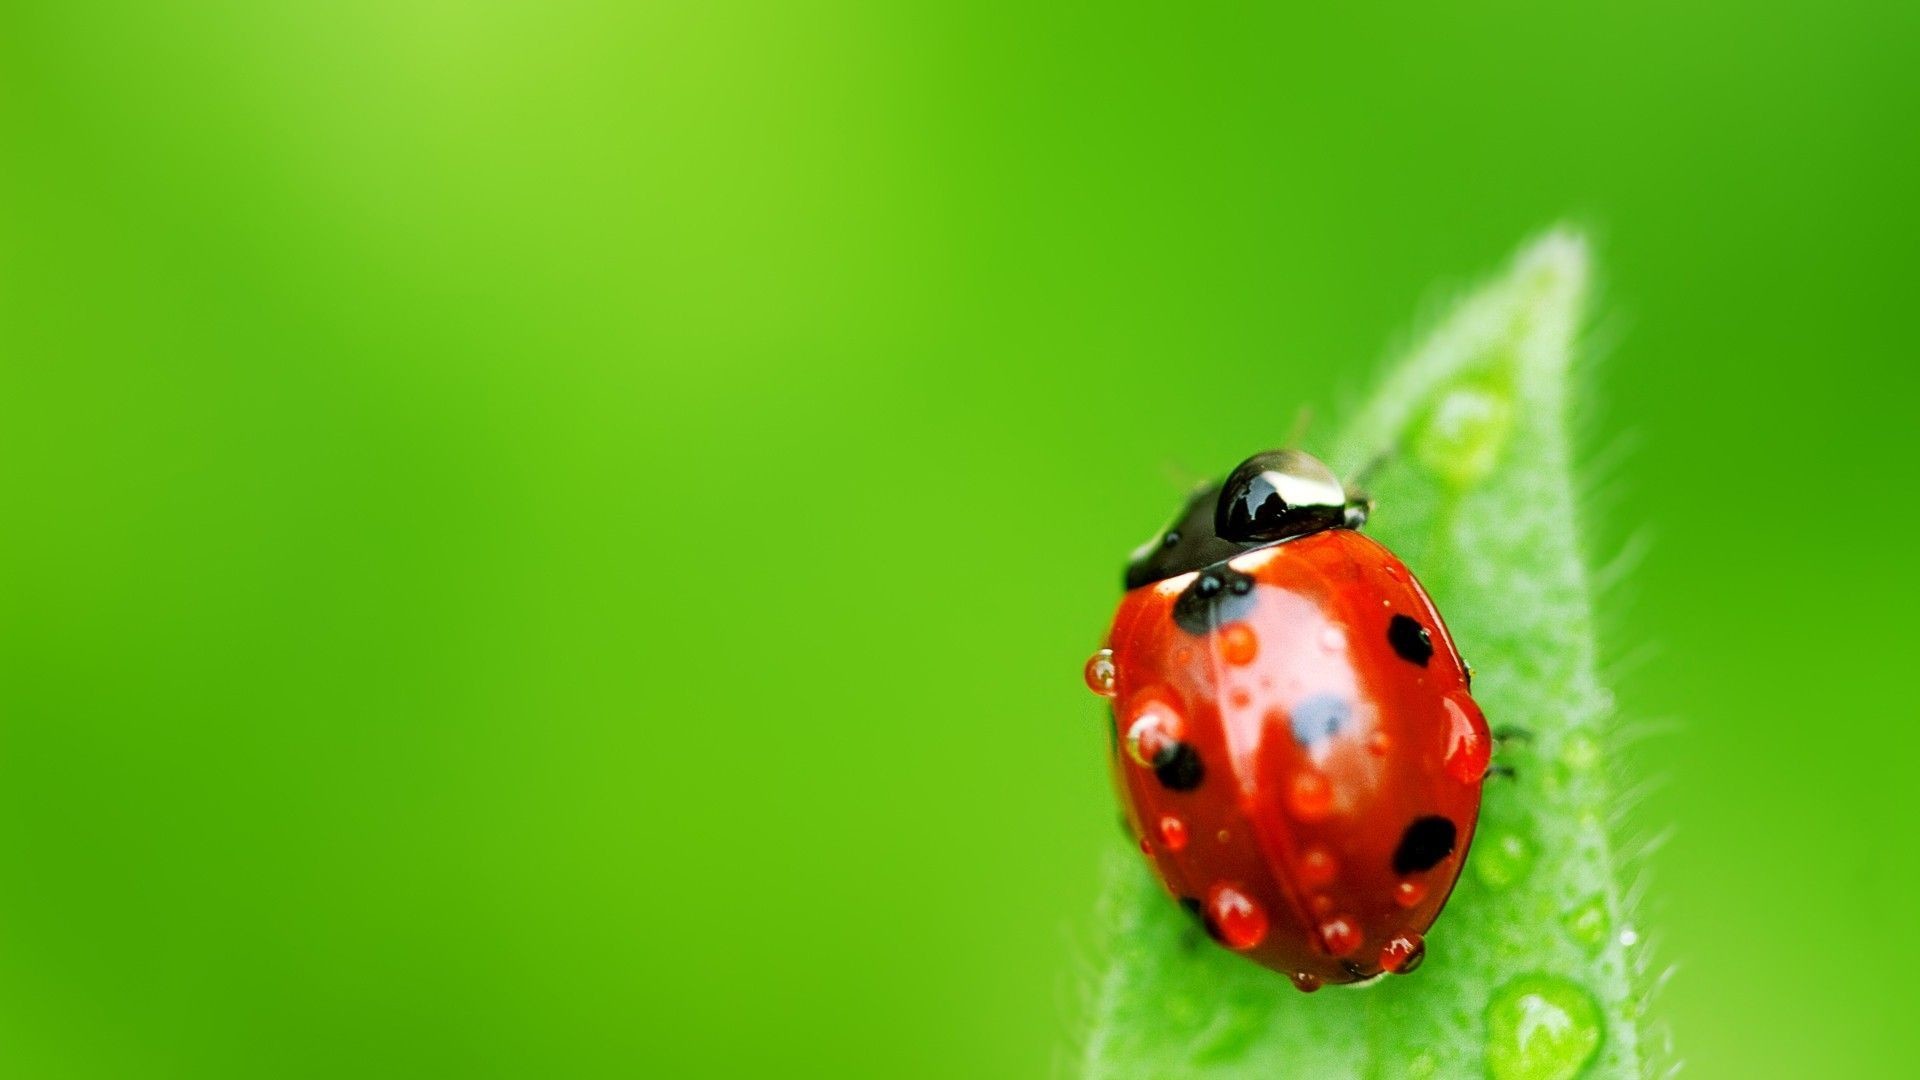 1920x1080 By Sueann Erby V.13: Amazing Ladybug Wallpapers, Pictures & Backgrounds